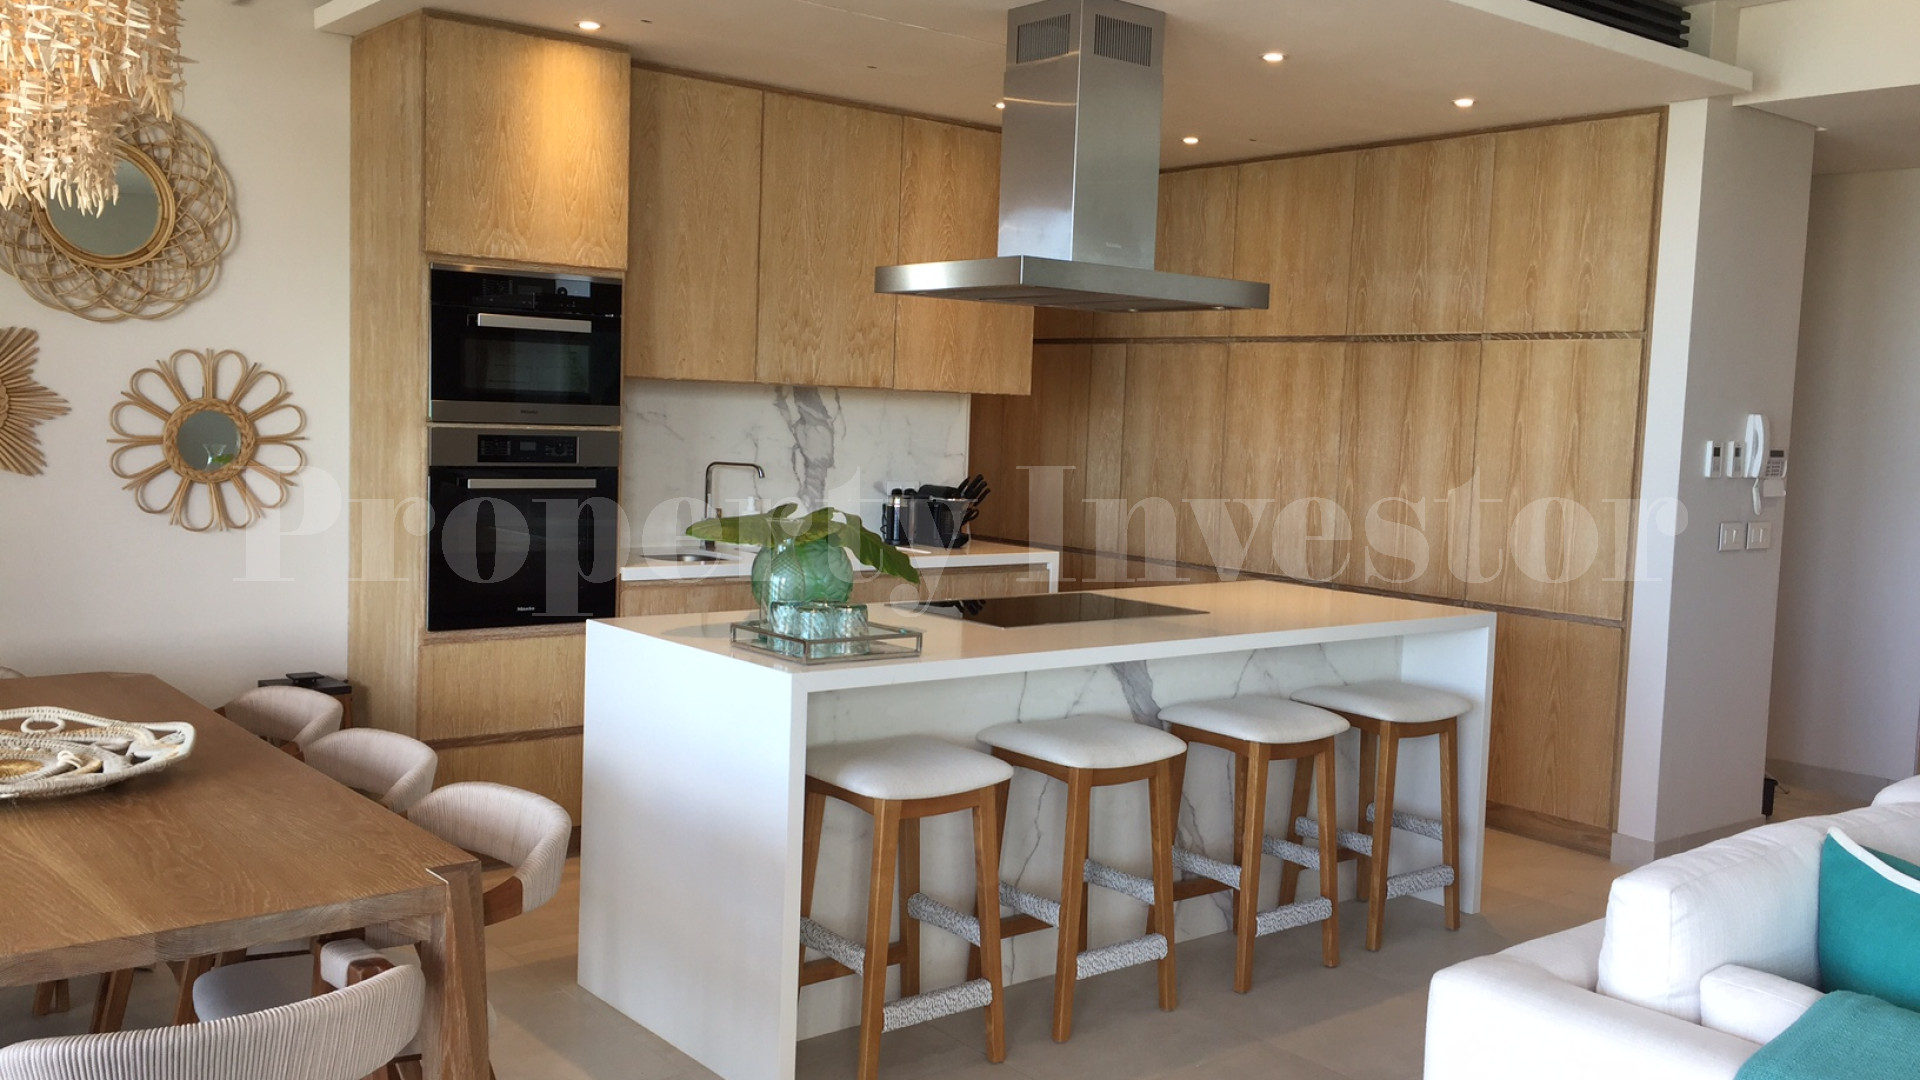 2 Bedroom Luxury Apartment with Award-Winning Design for Sale in Seychelles